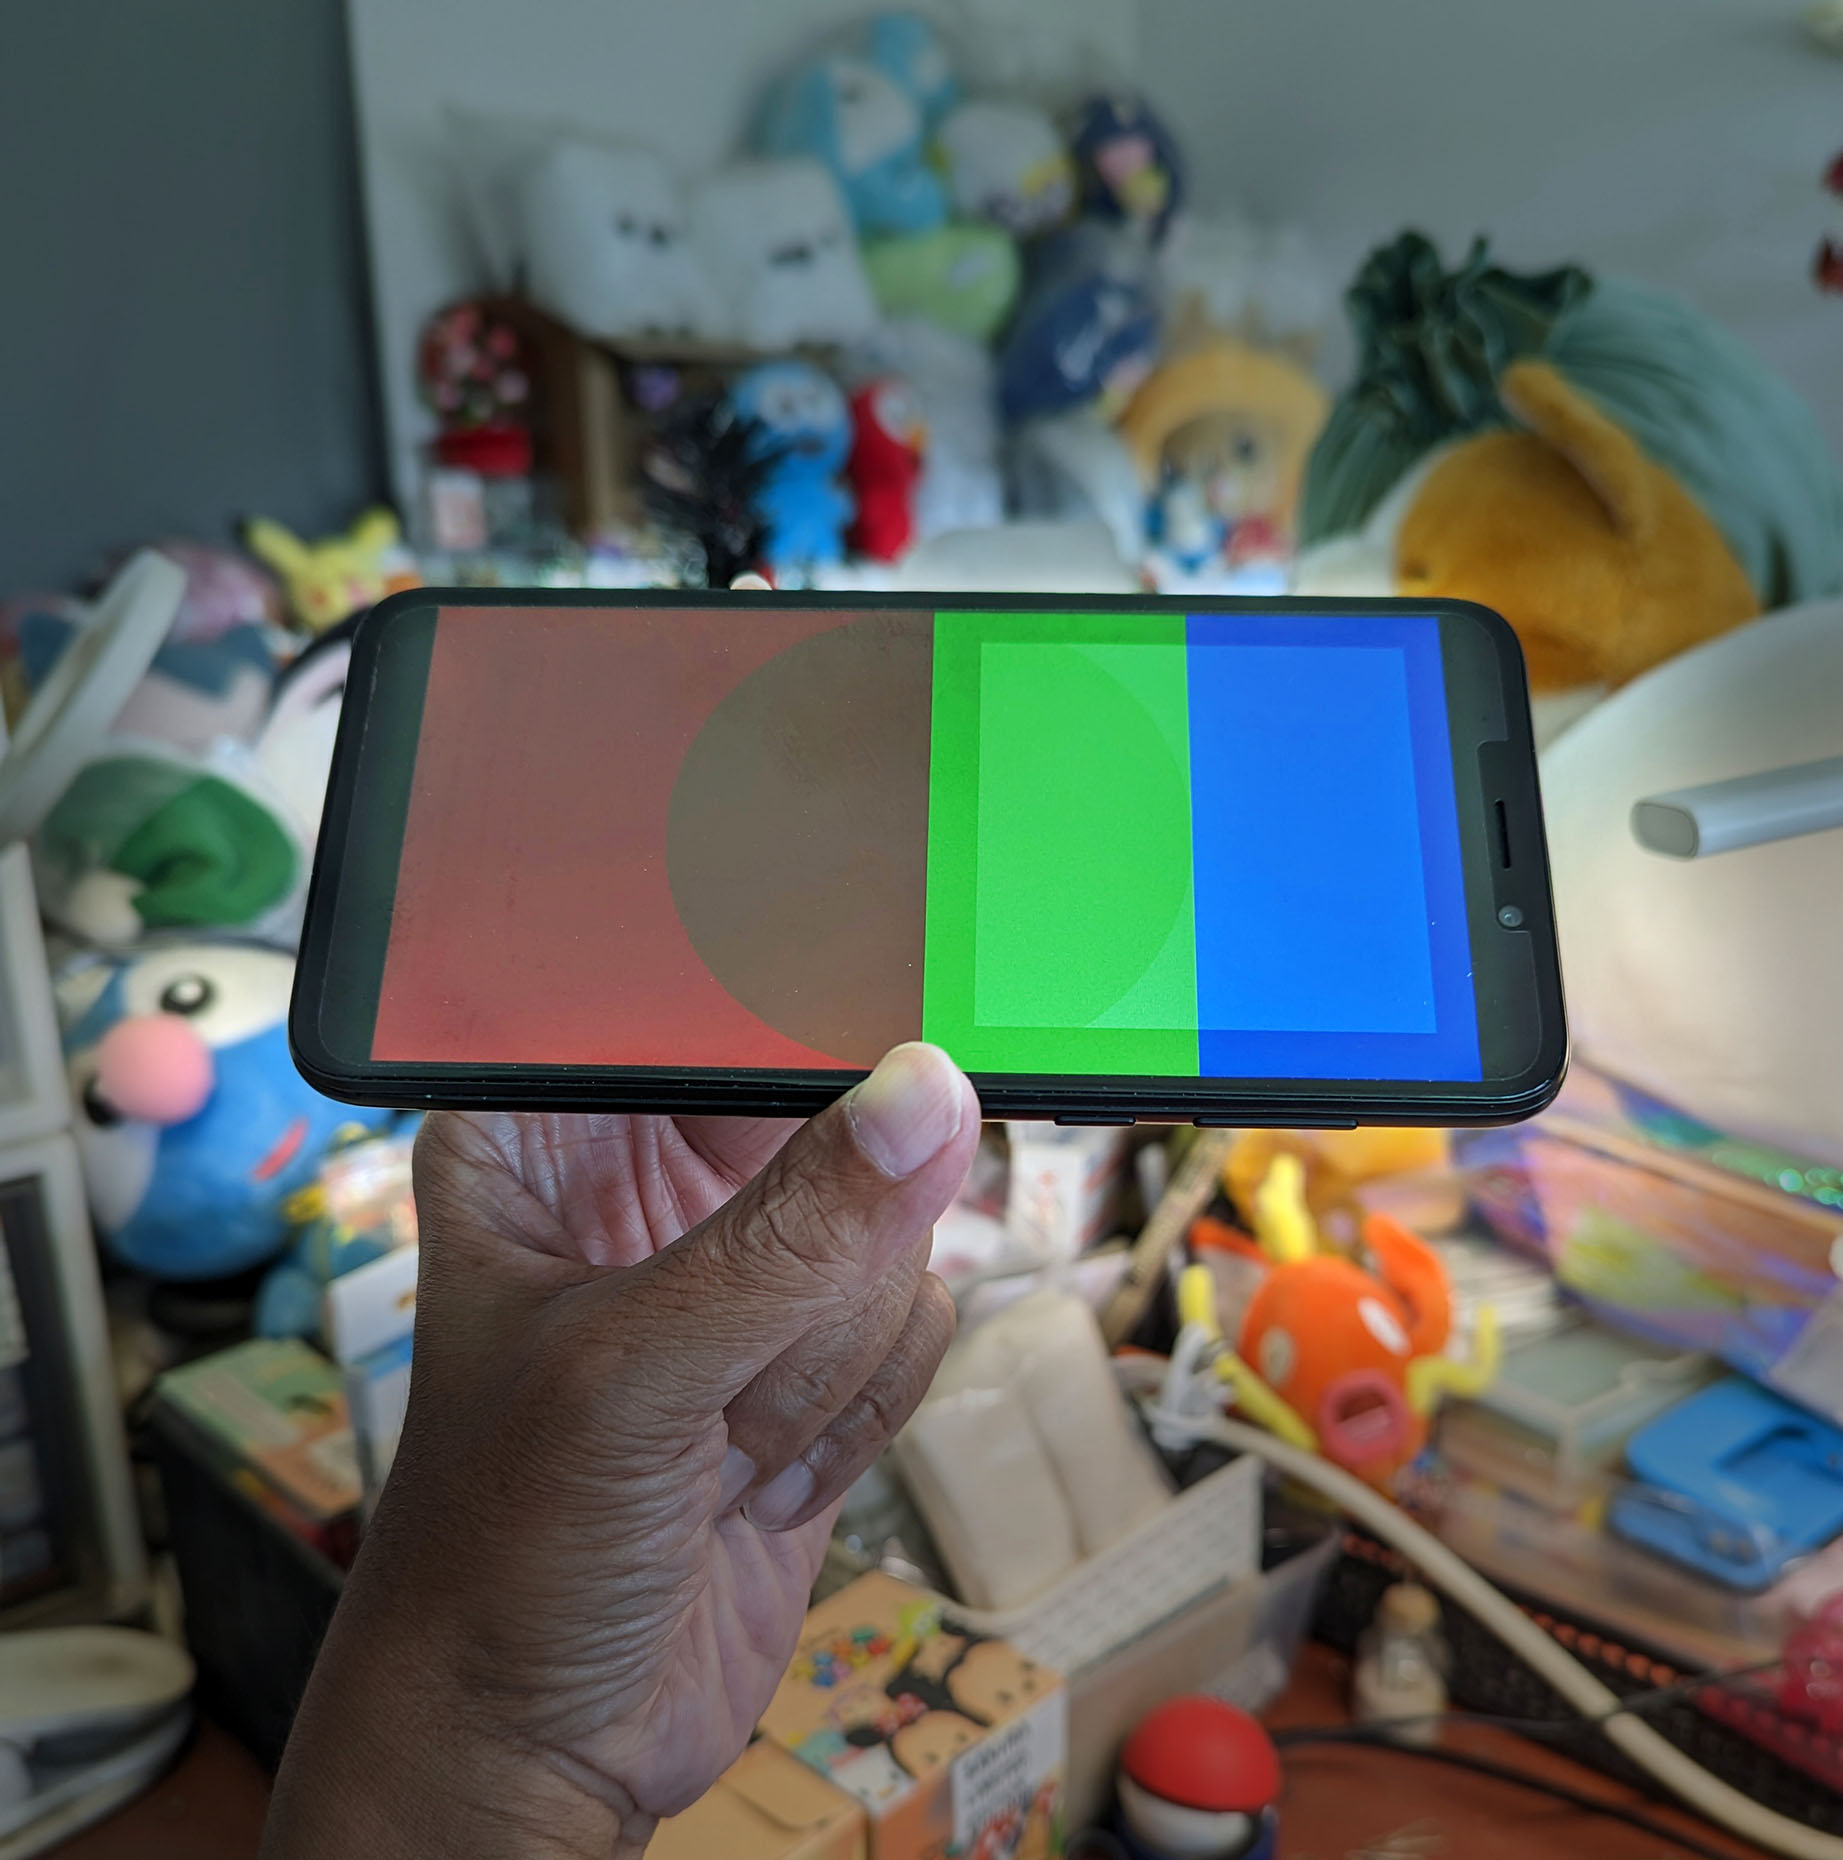 Test Pattern on NuttX for PinePhone